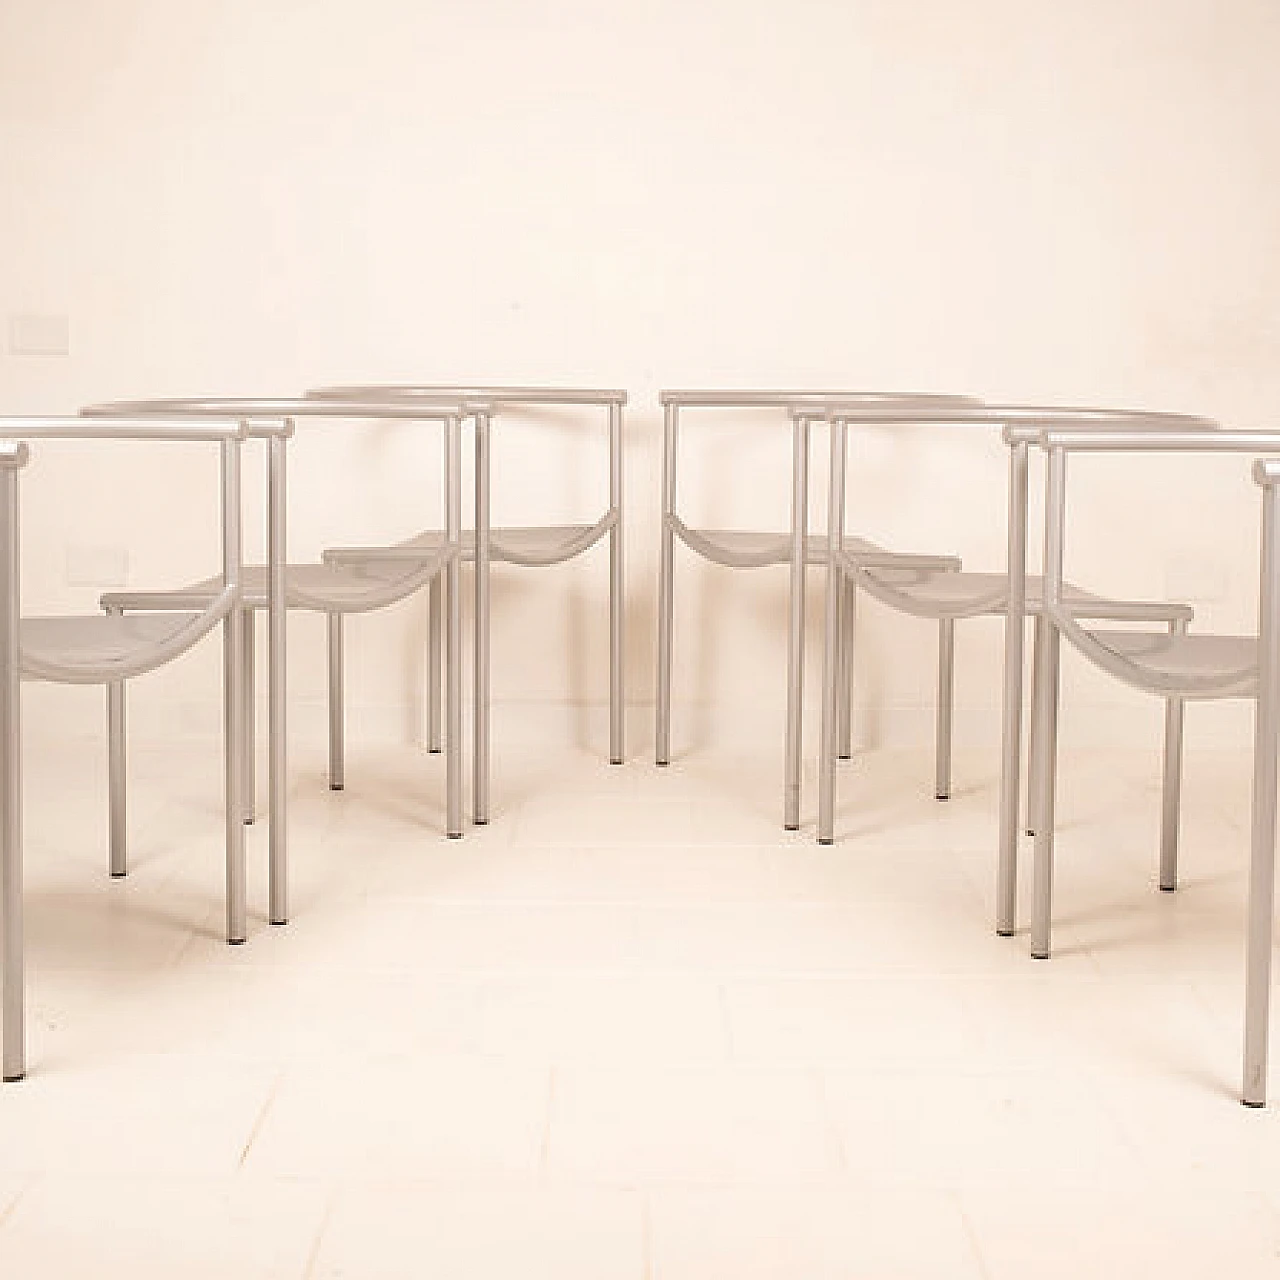 6 Von Vogelsang chairs by Philippe Starck for Driade, 1980s 1